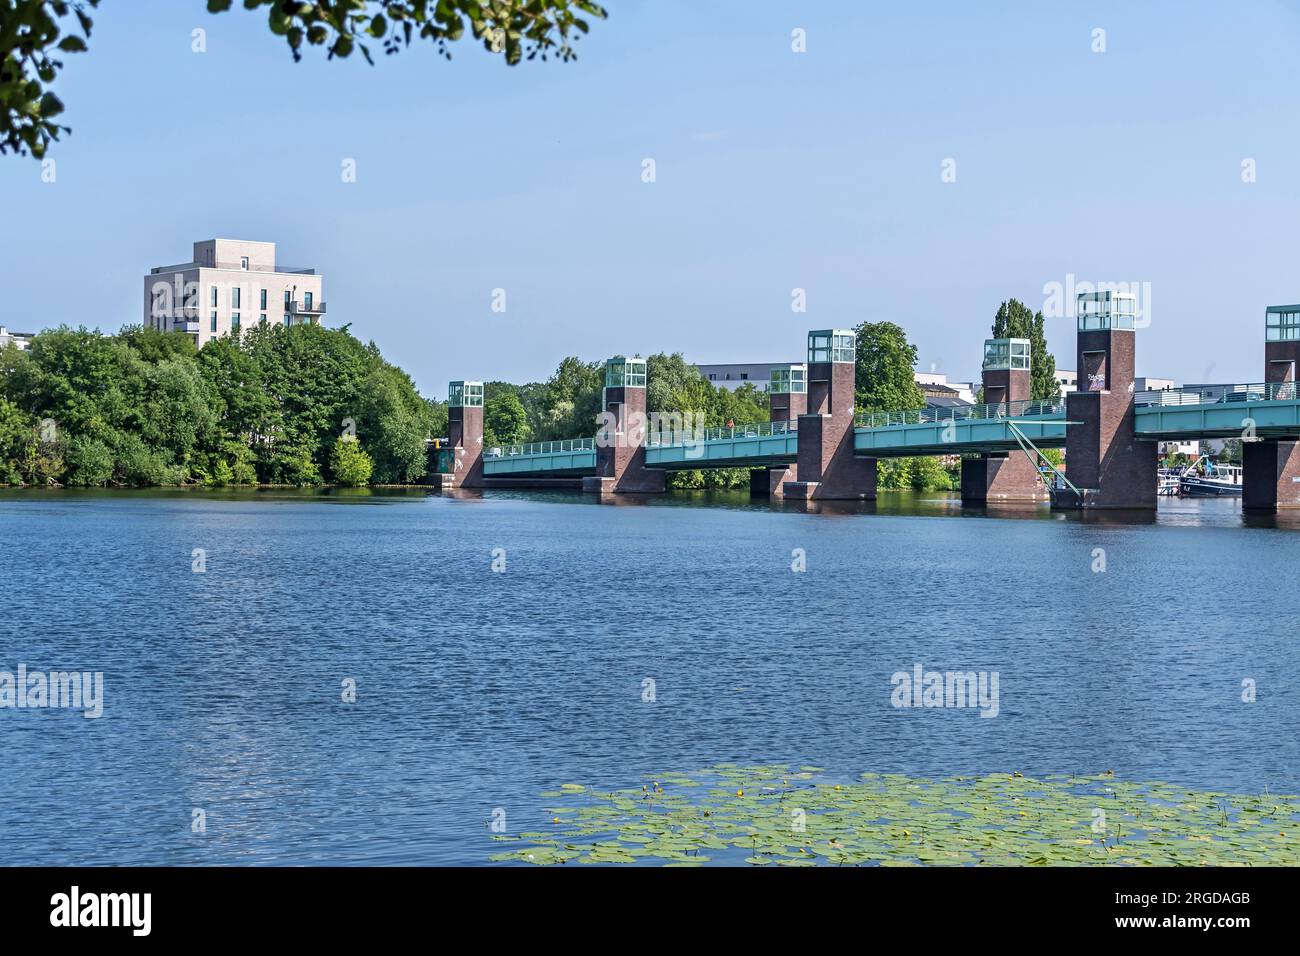 Berlin, Germany - June 13, 2023: Steel girder bridge Spandauer-See Bruecke over the River Havel connects the parts of the Wasserstadt Oberhavel, which Stock Photo